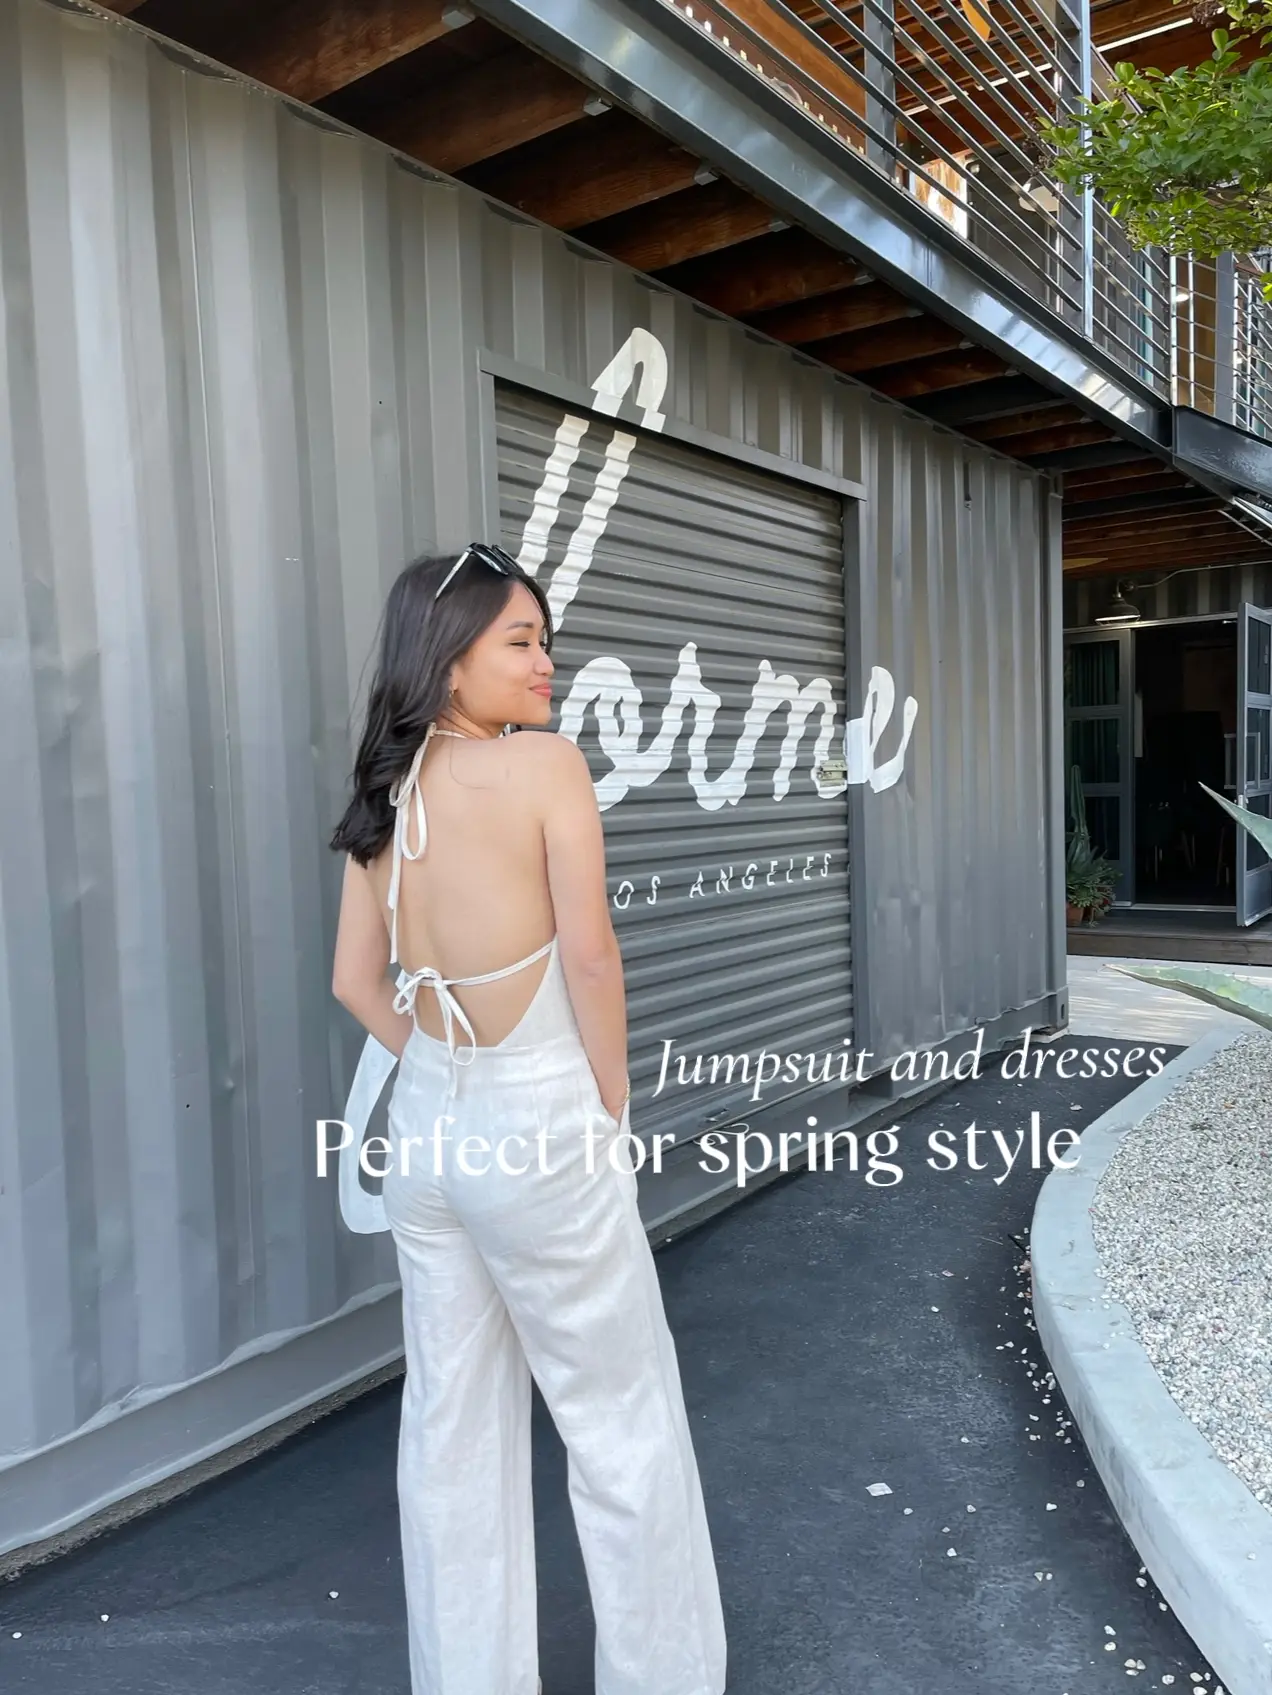 Jumpsuit and Dresses perfect for spring style's images